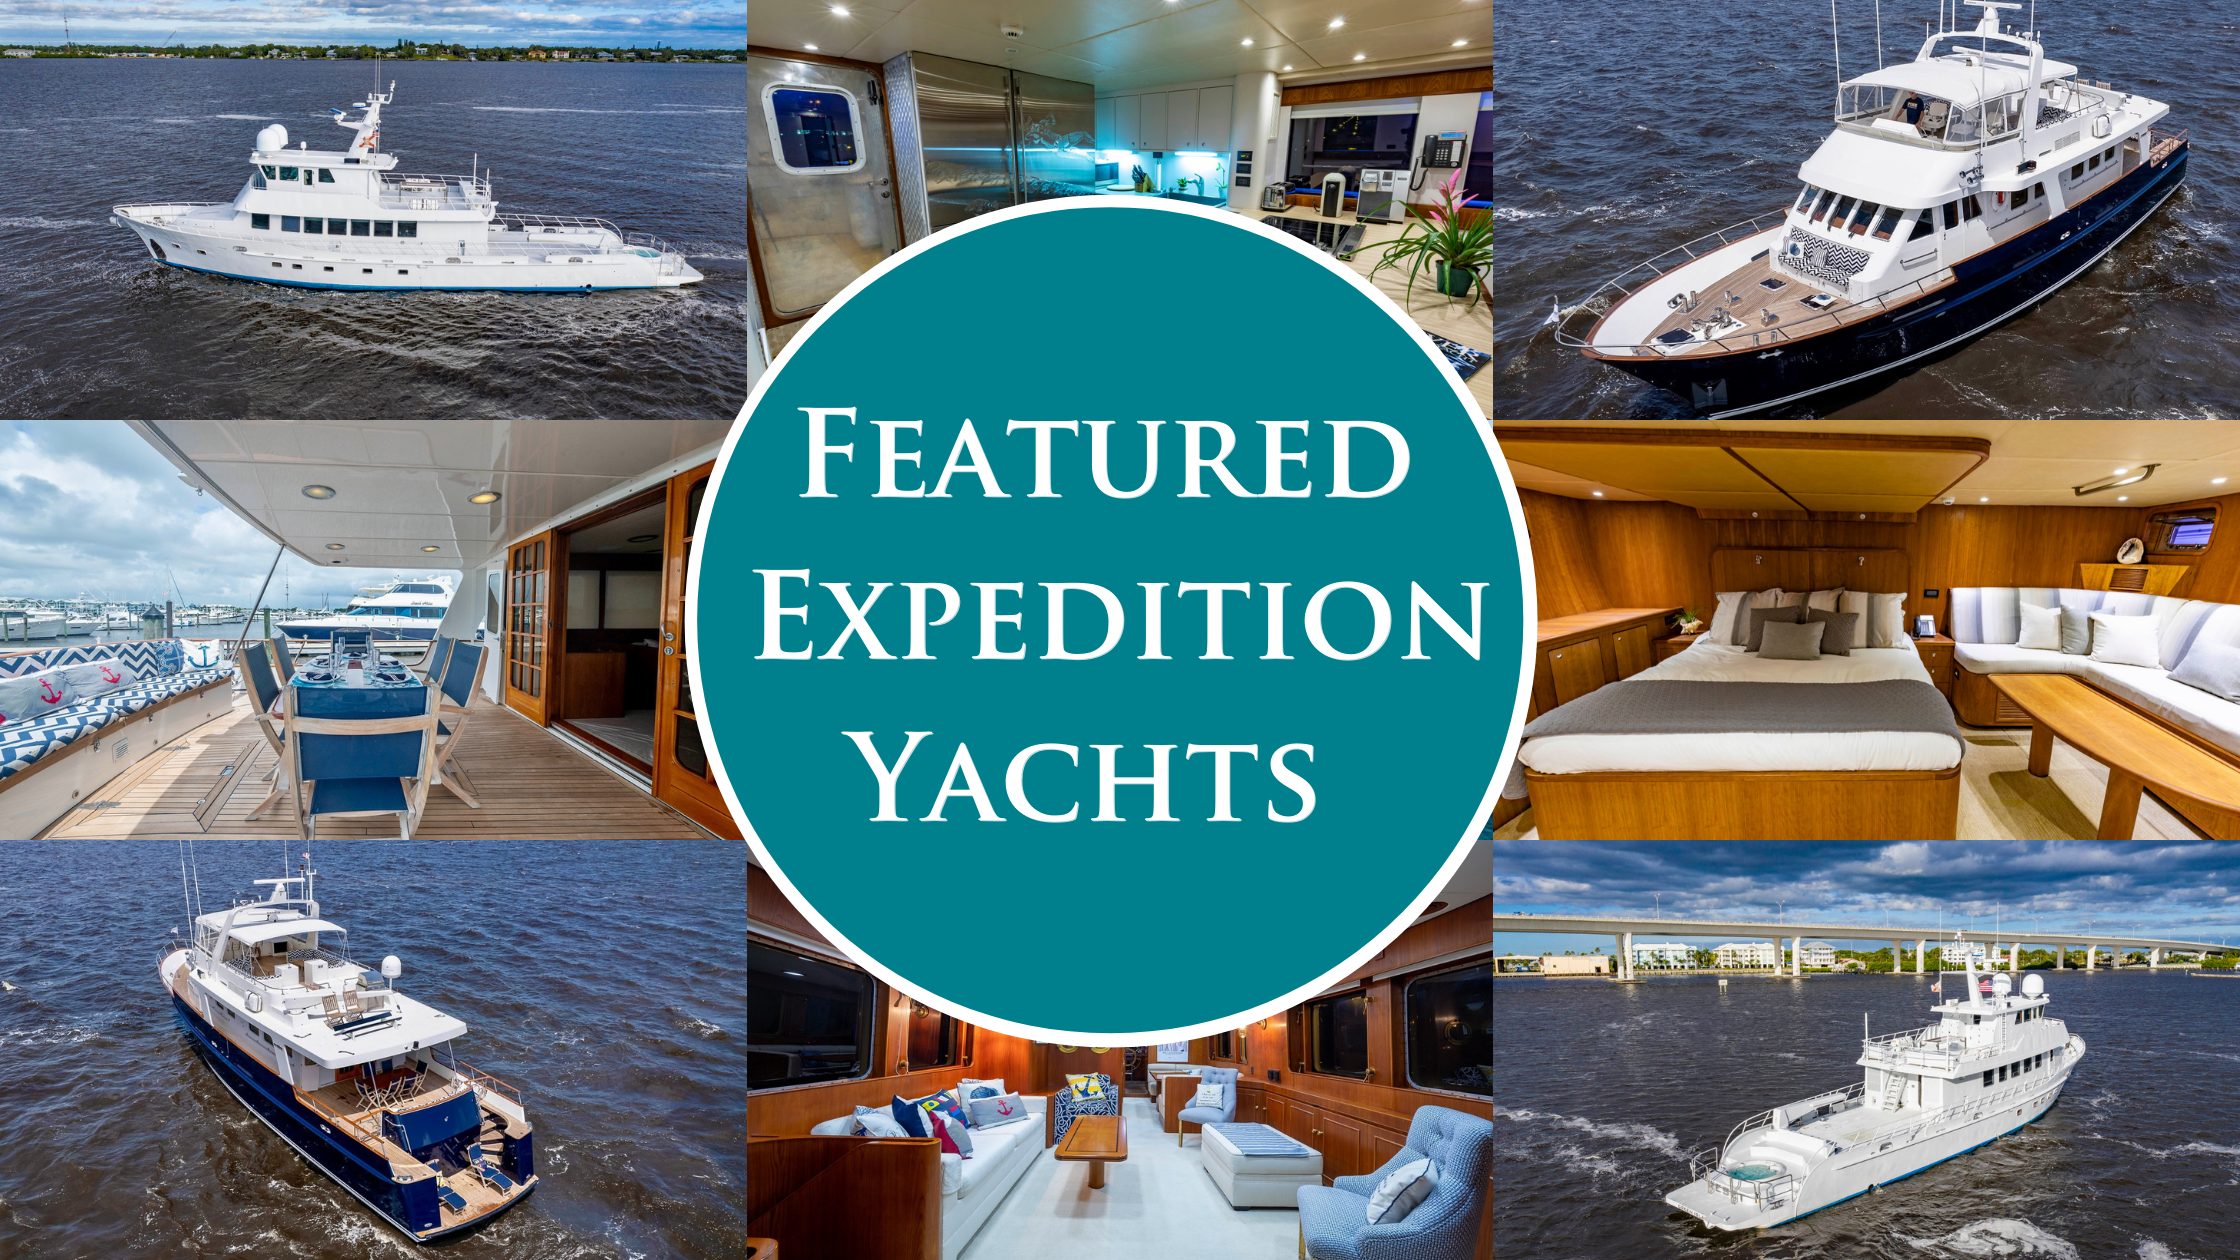 Sophisticated Exploration — Two Turnkey Expedition Yachts for Sale You Don’t Want to Miss